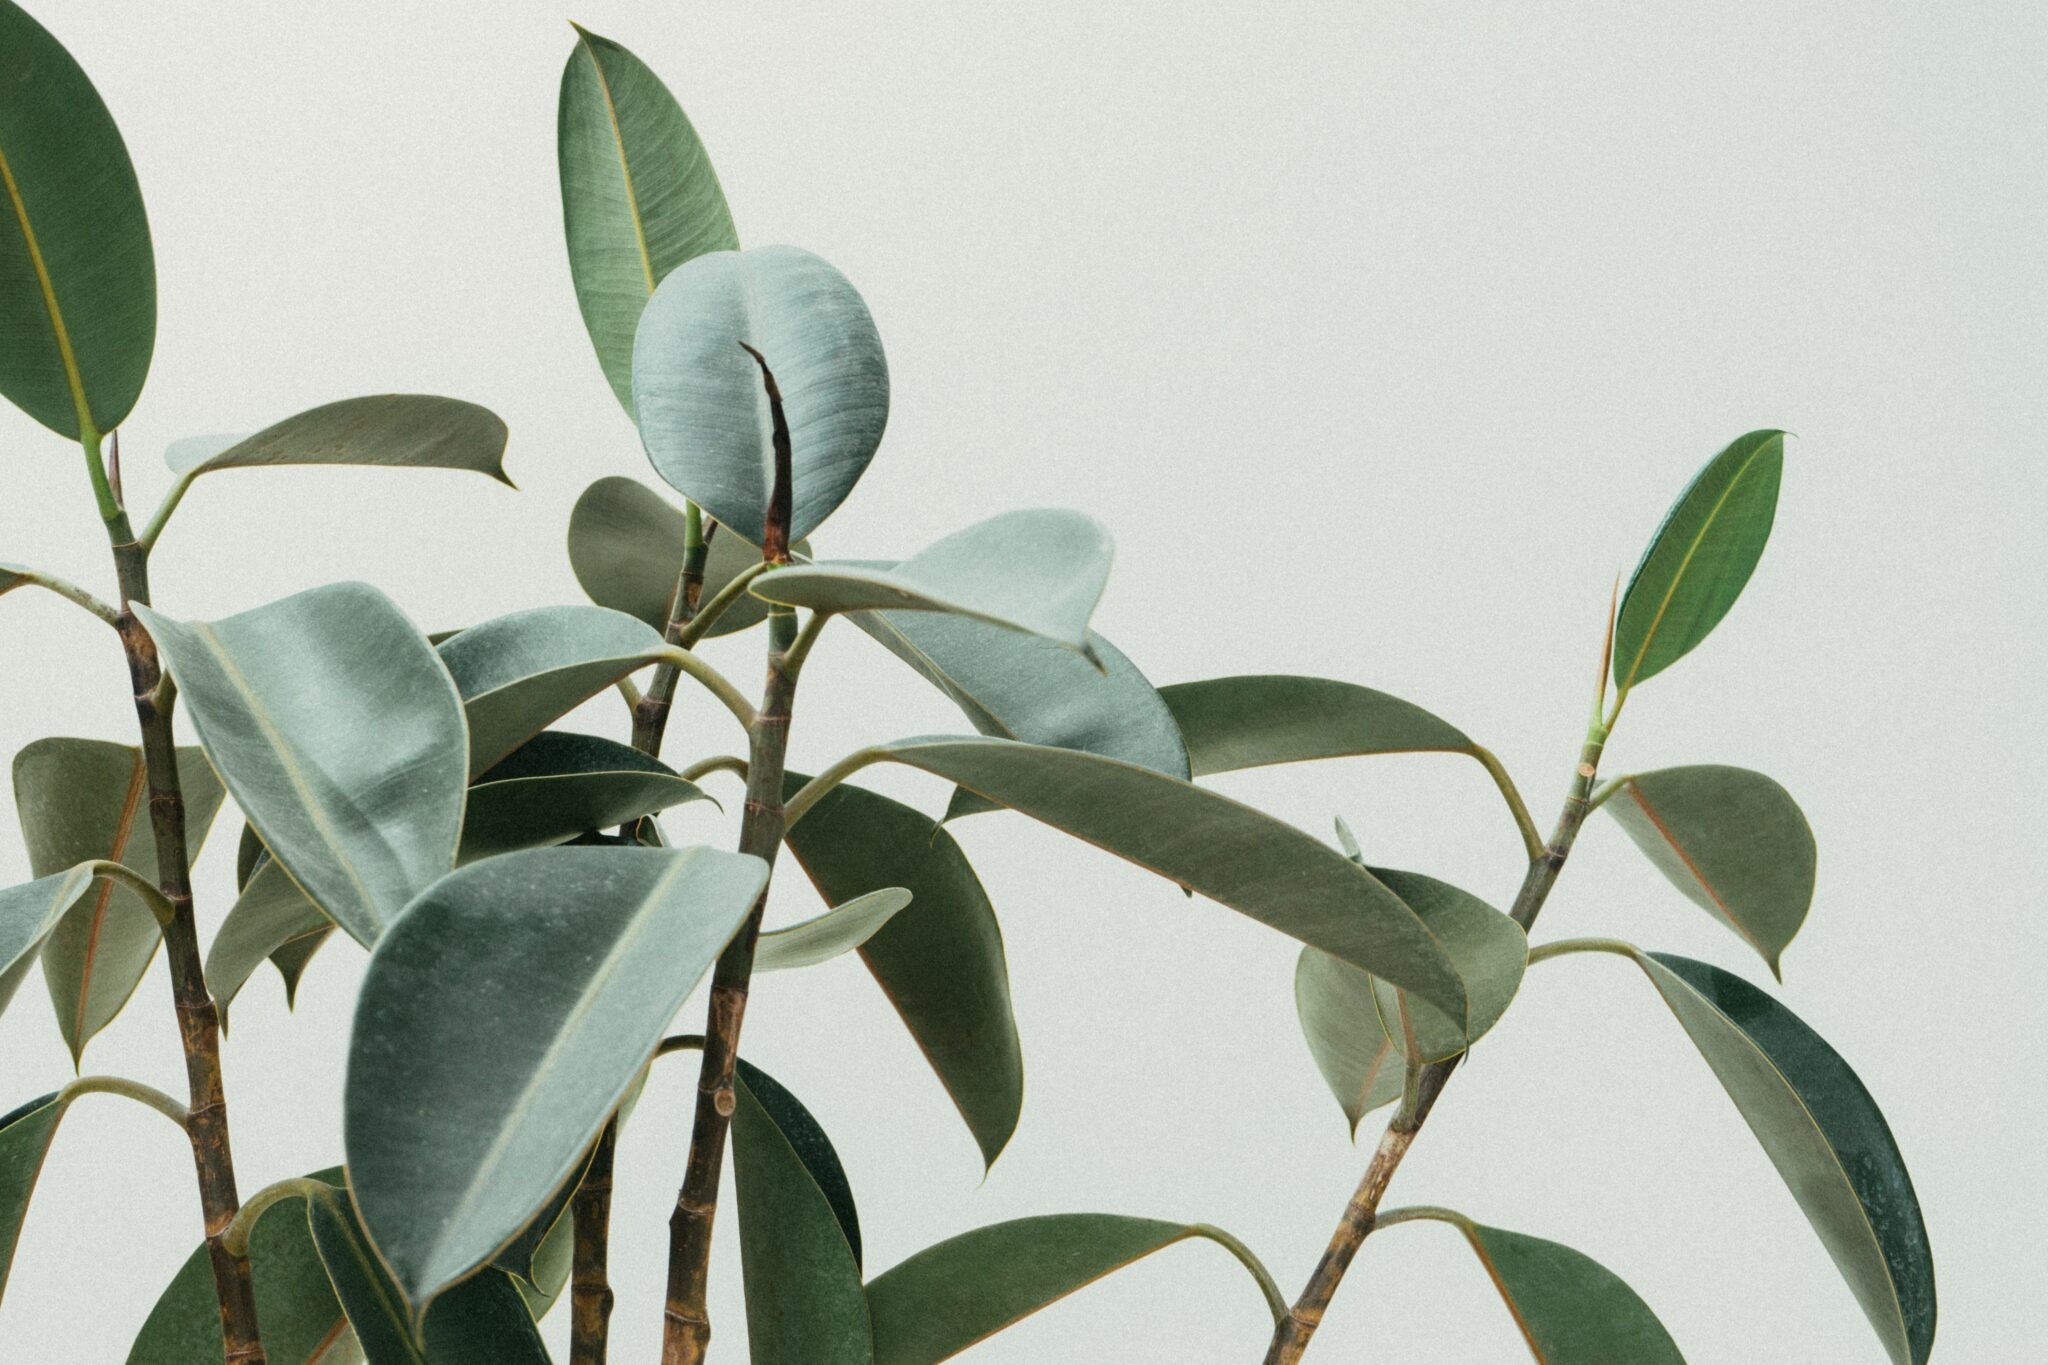 How to Repot a Rubber Tree